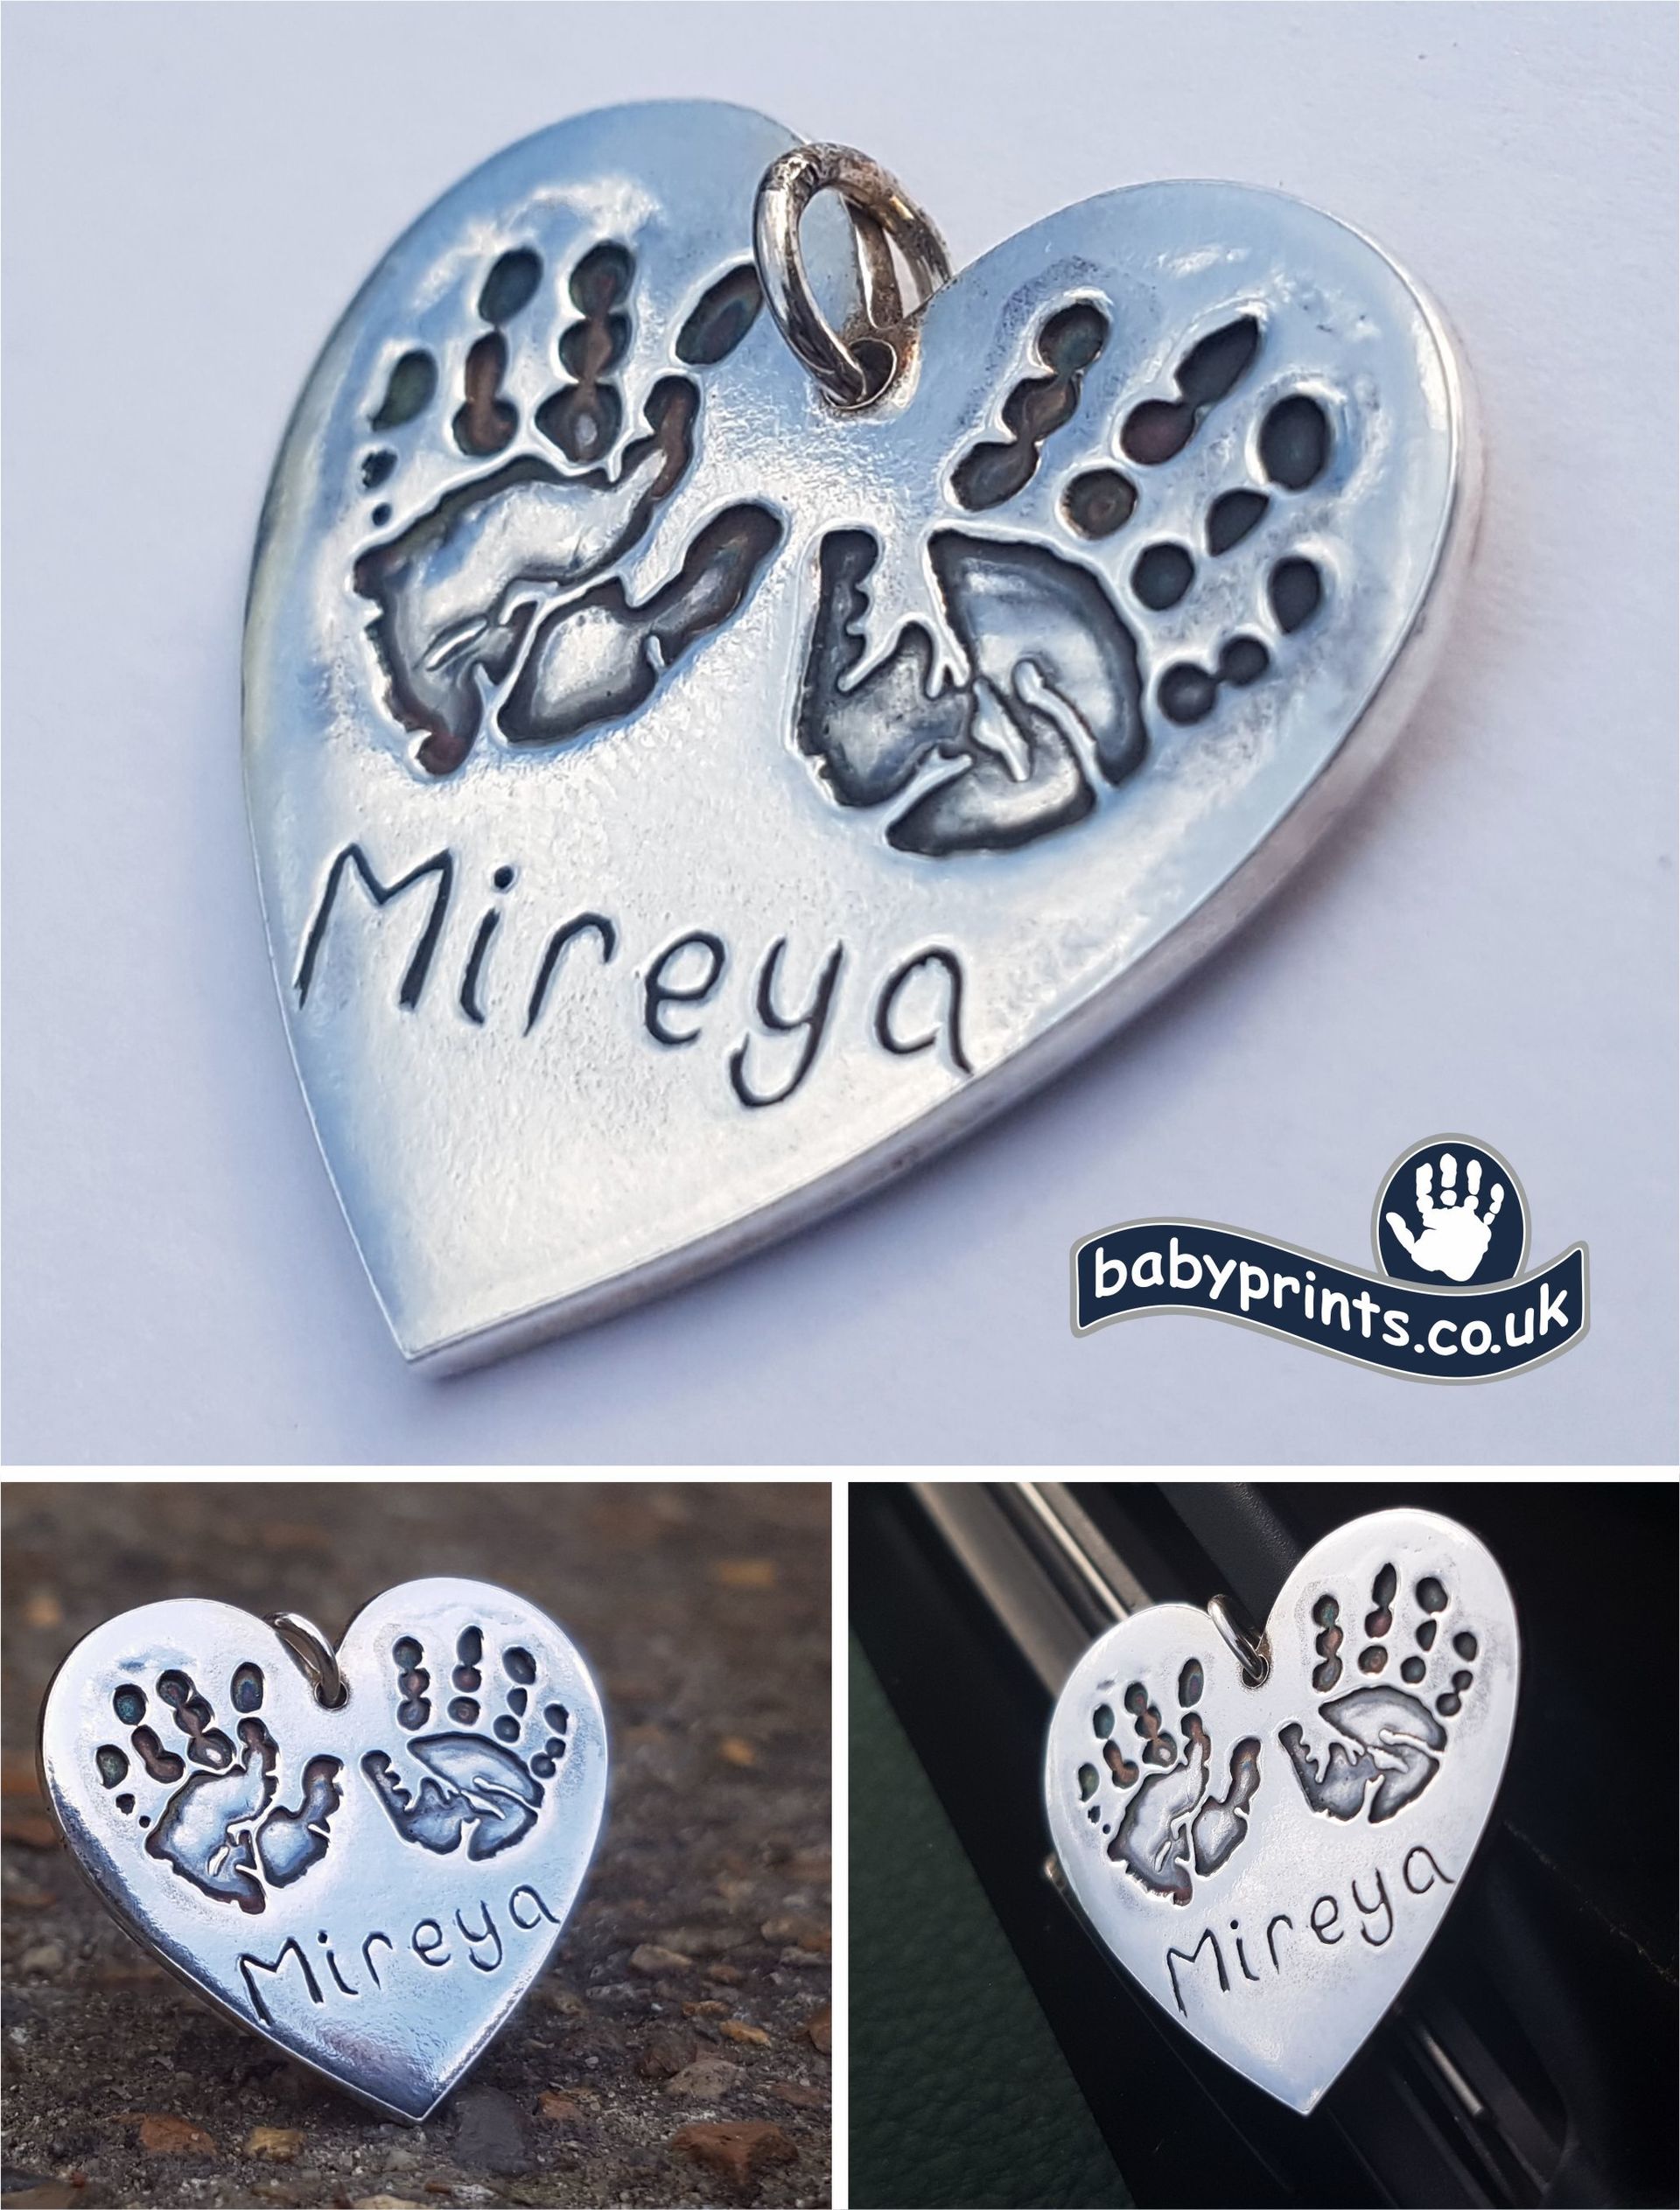 Two hand prints on jewellery